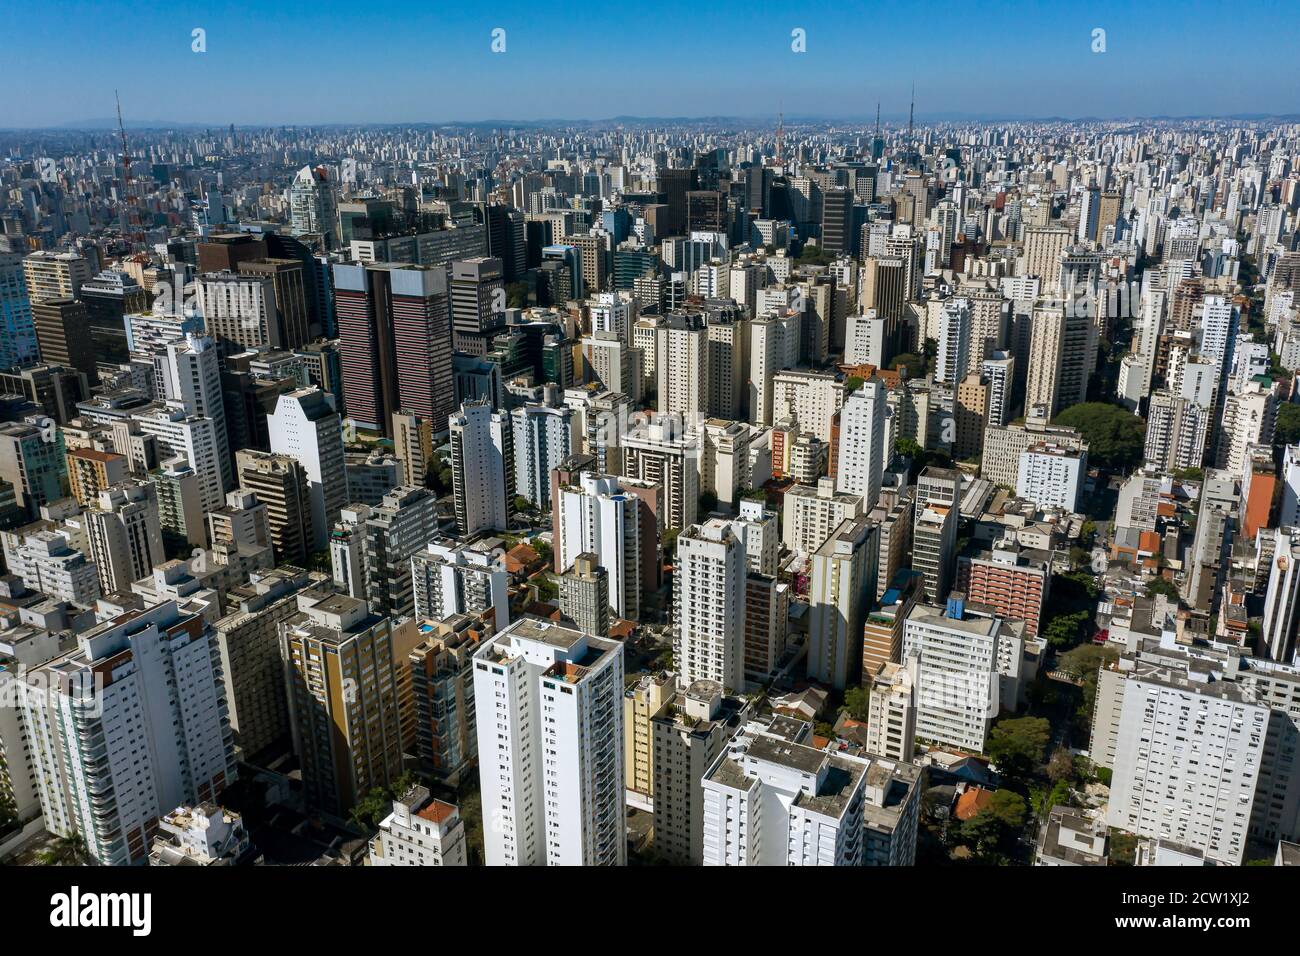 Aerial view of big city. Stock Photo